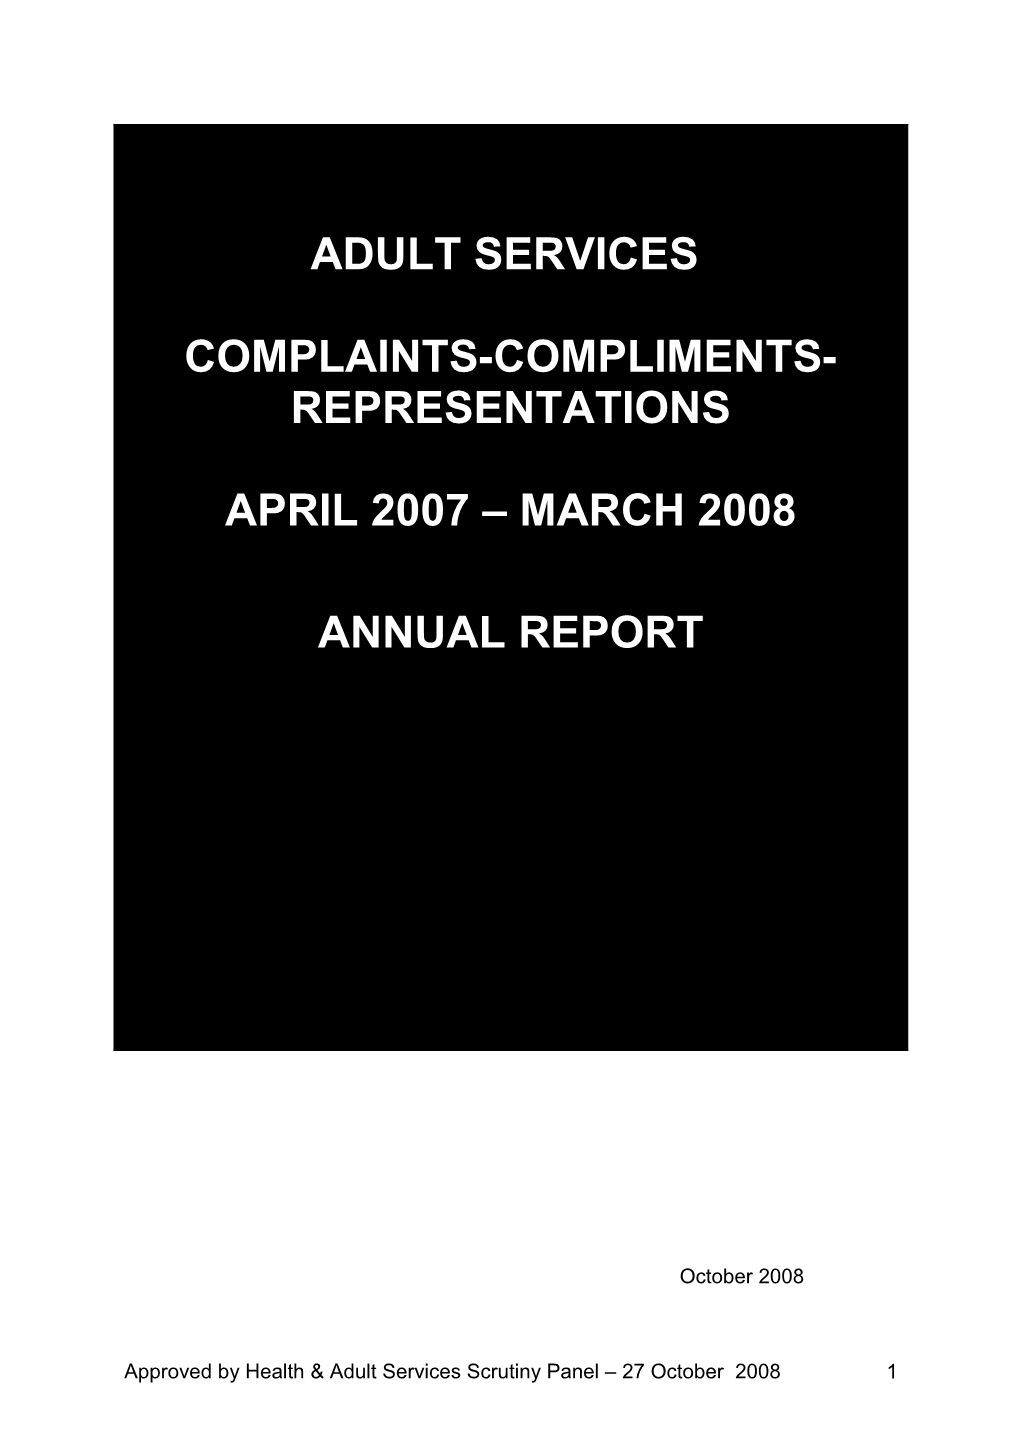 Appendix 1: Summary Table of Community Based Services 18